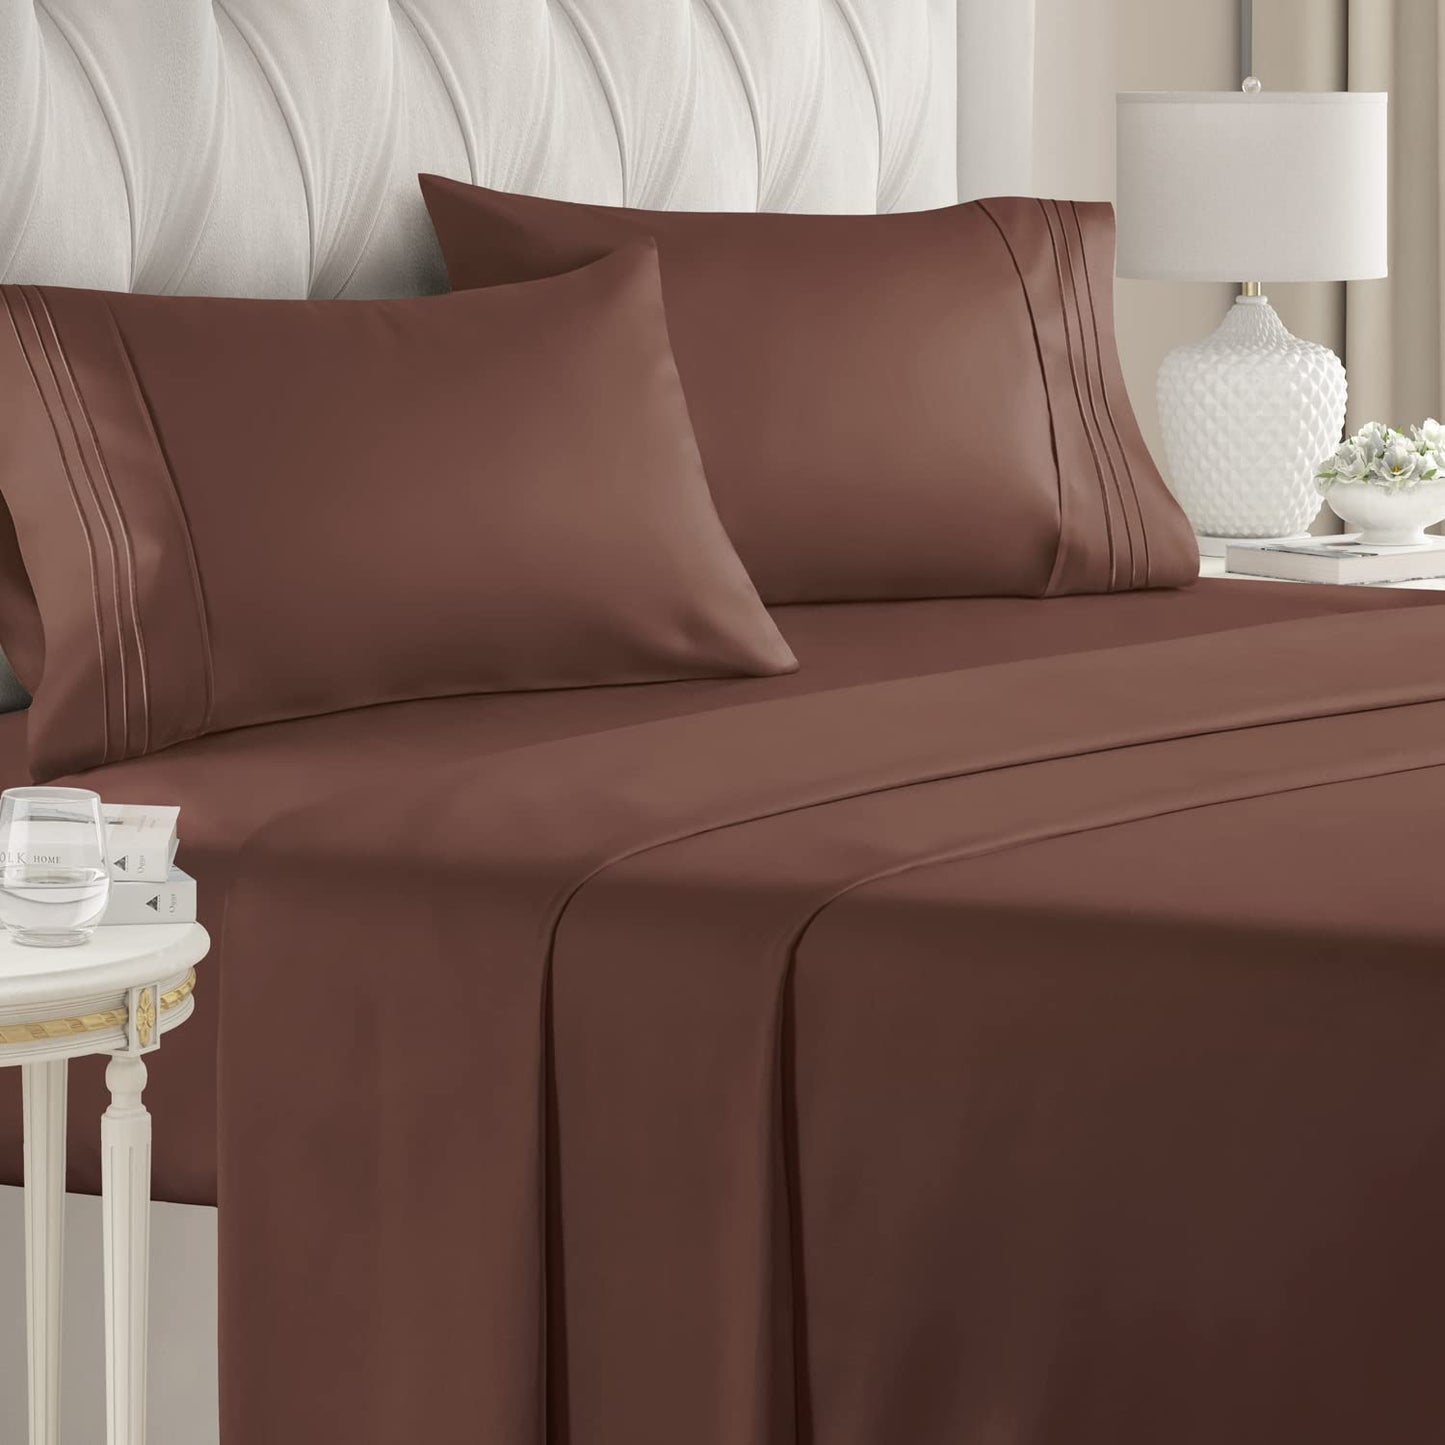 4 Piece Bed Sheet Set 100% Egyptian Cotton 1000-TC 45 inch Deep Pocket Chocolate Color